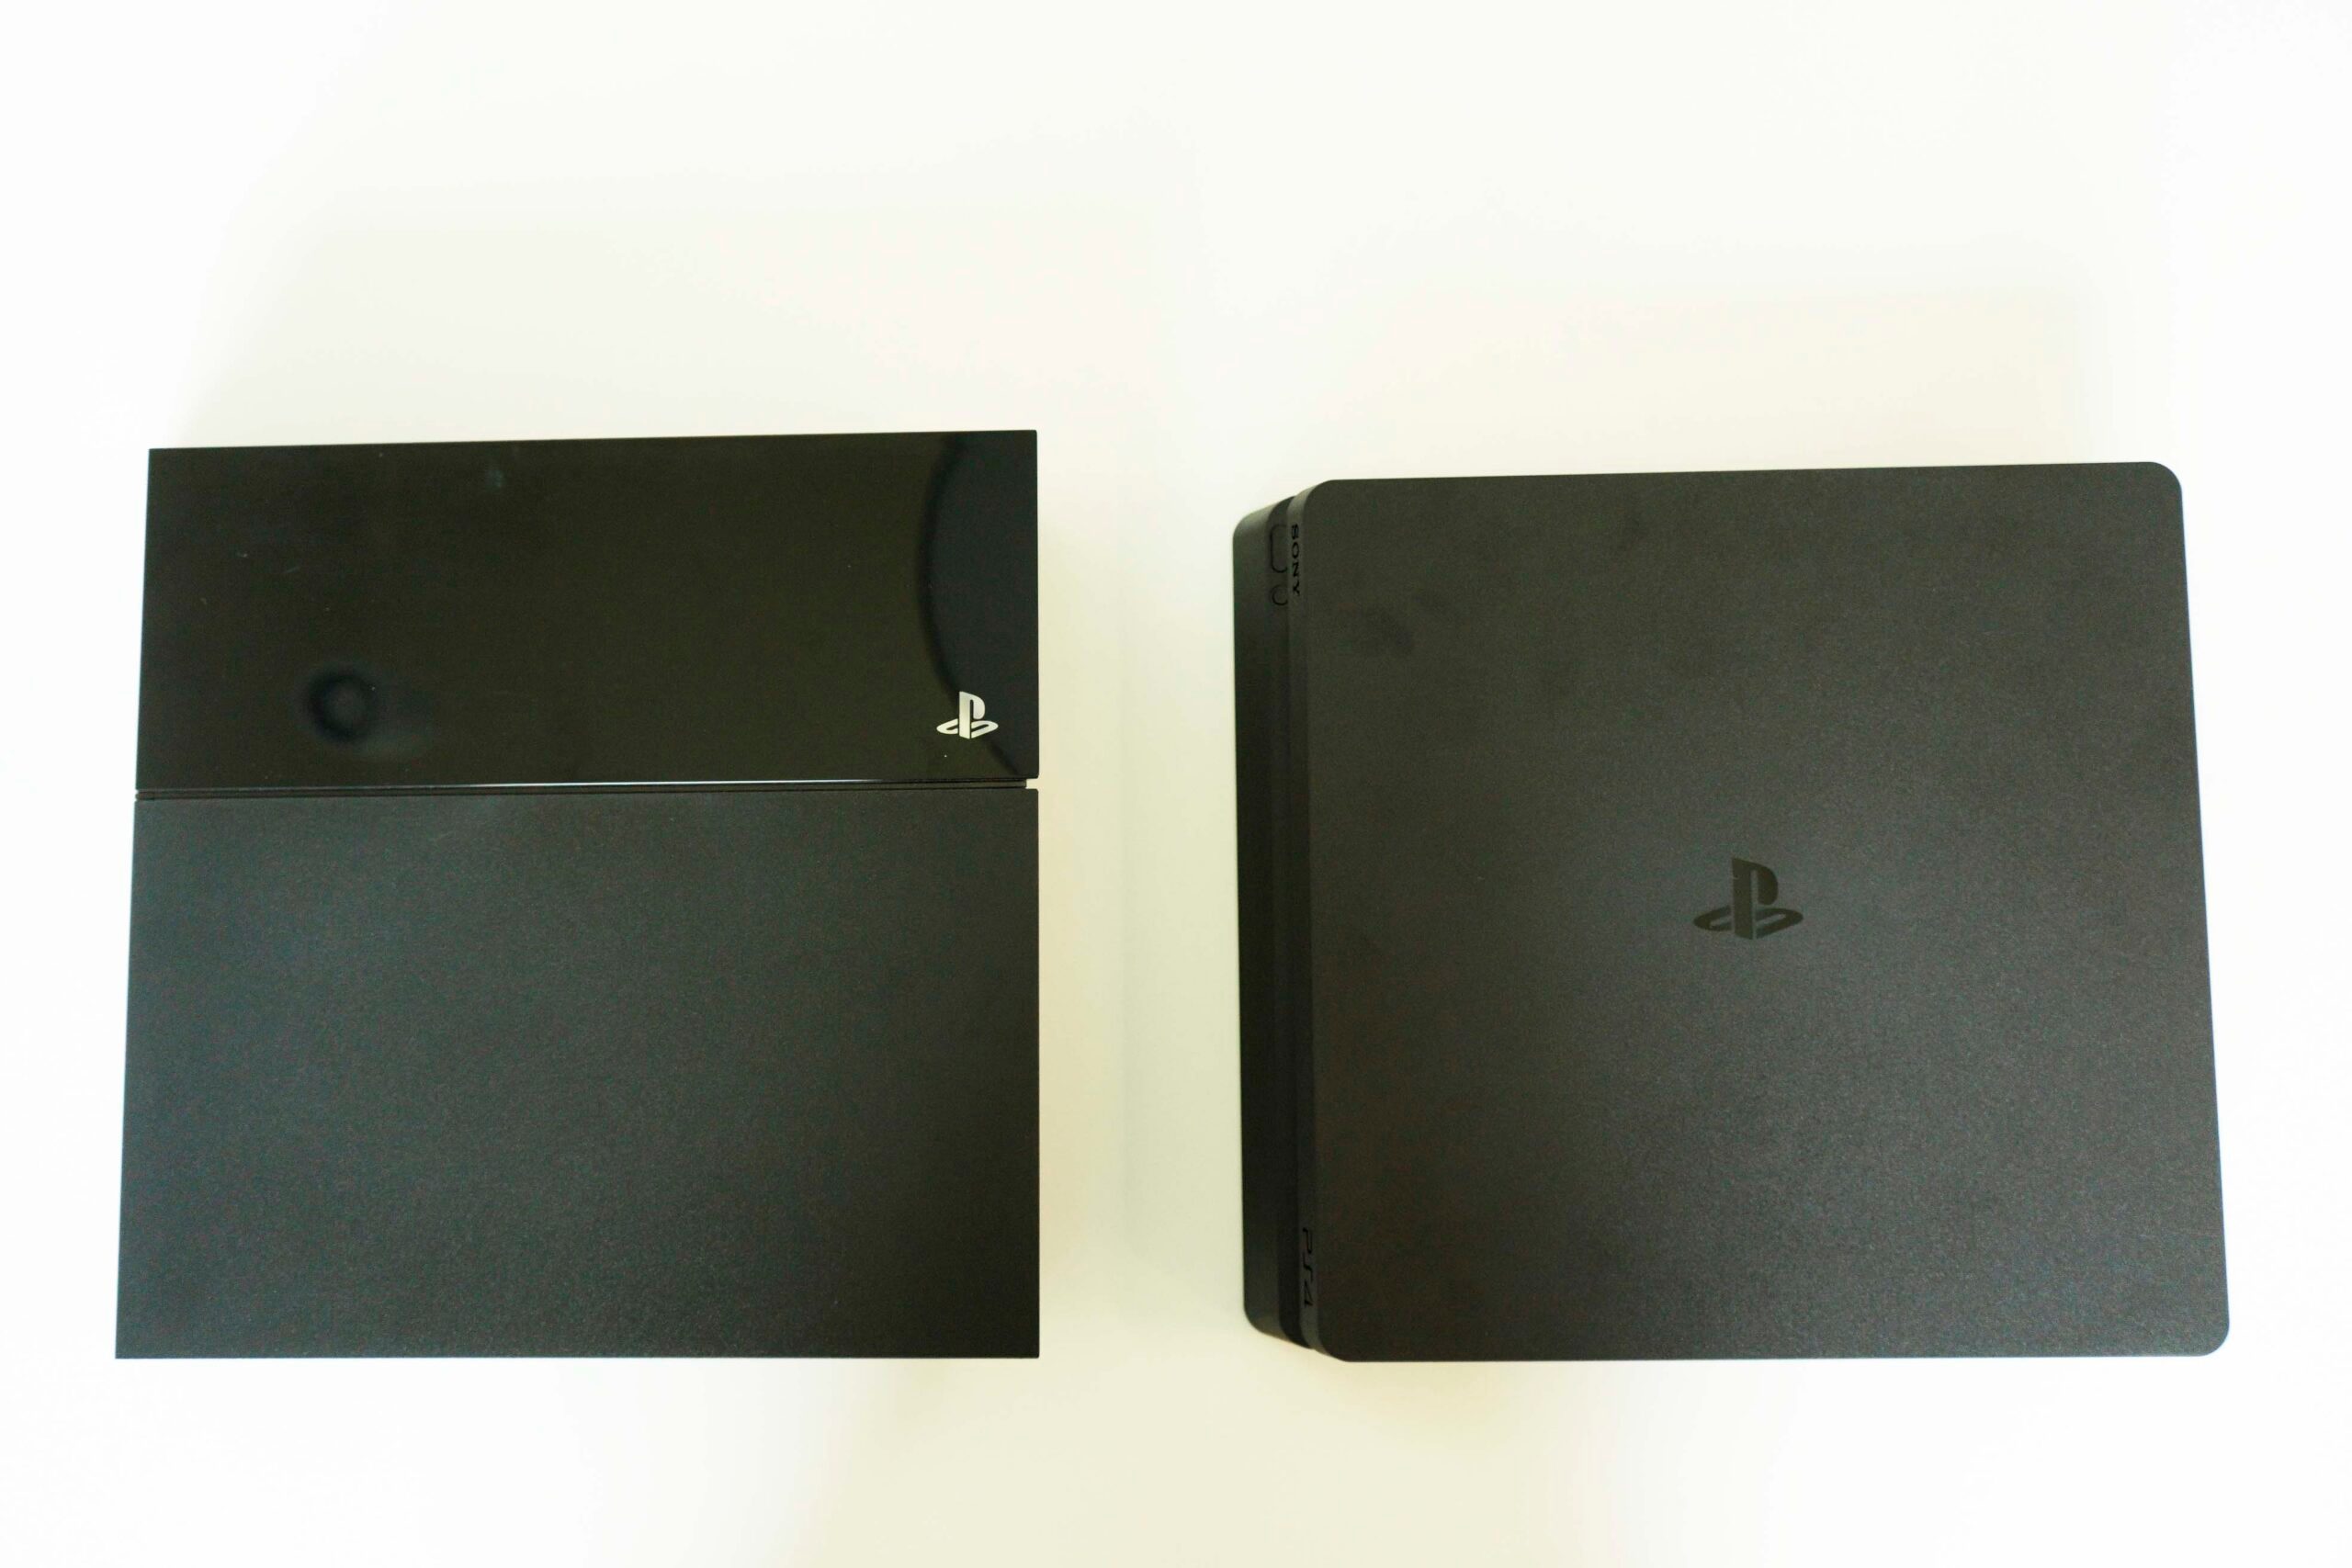 IN PHOTOS: How the PS4 Slim compares to the the original PS4